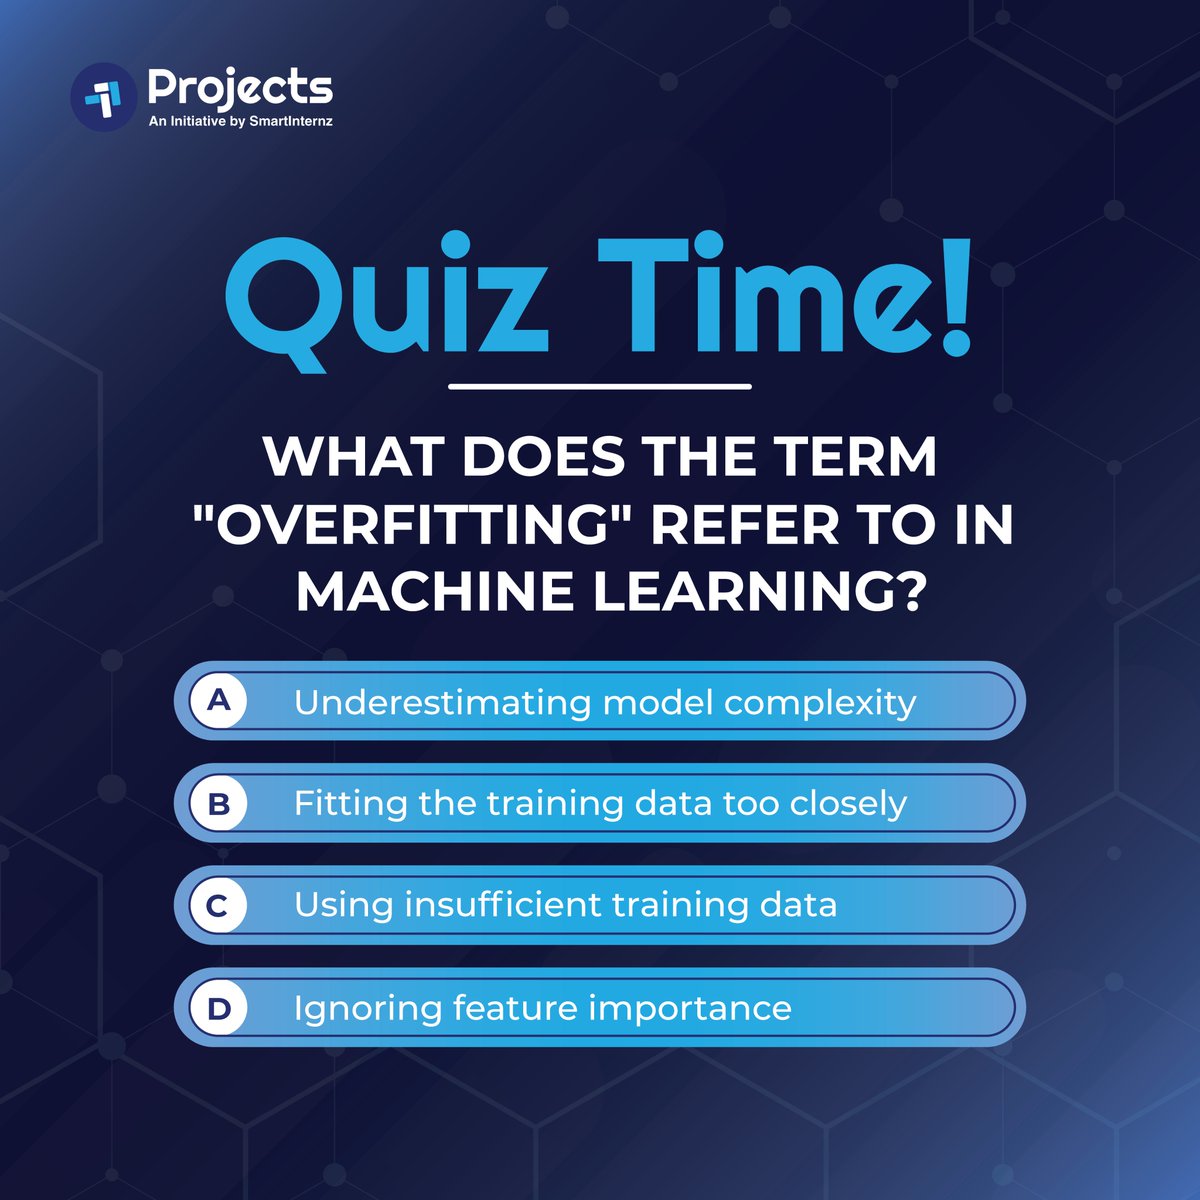 Choose wisely from the 4 options and tell us your answer in the comment section below! 😎👇 Let's hear what you think!

#projectsbysmartinternz #machinelearning #machinelearningtechnology #quiztime #trivia #knowledge #quizoftheday